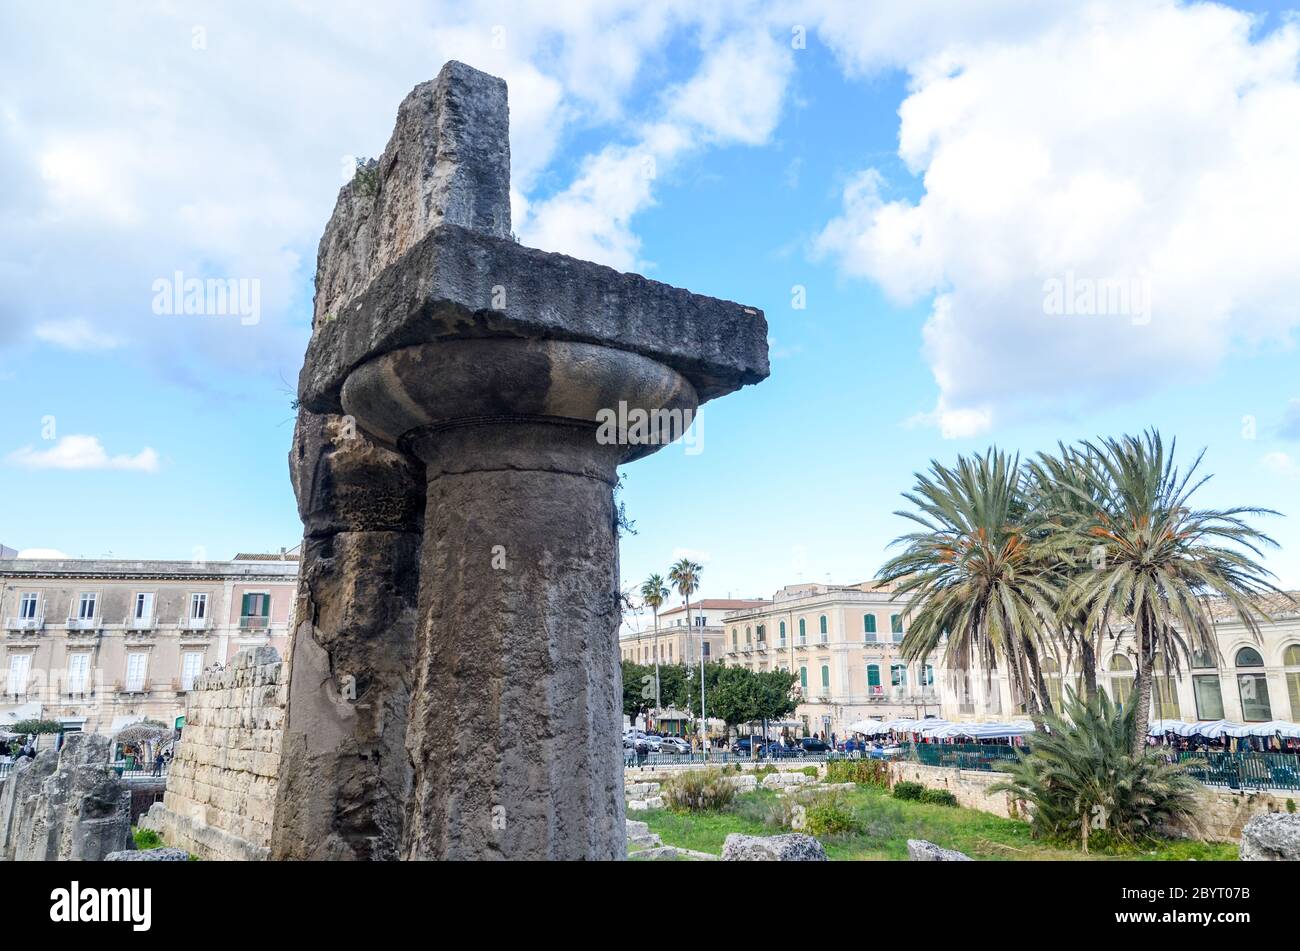 Temple of Apollo, in the city centre of Syracuse, Sicily, Italy Stock Photo